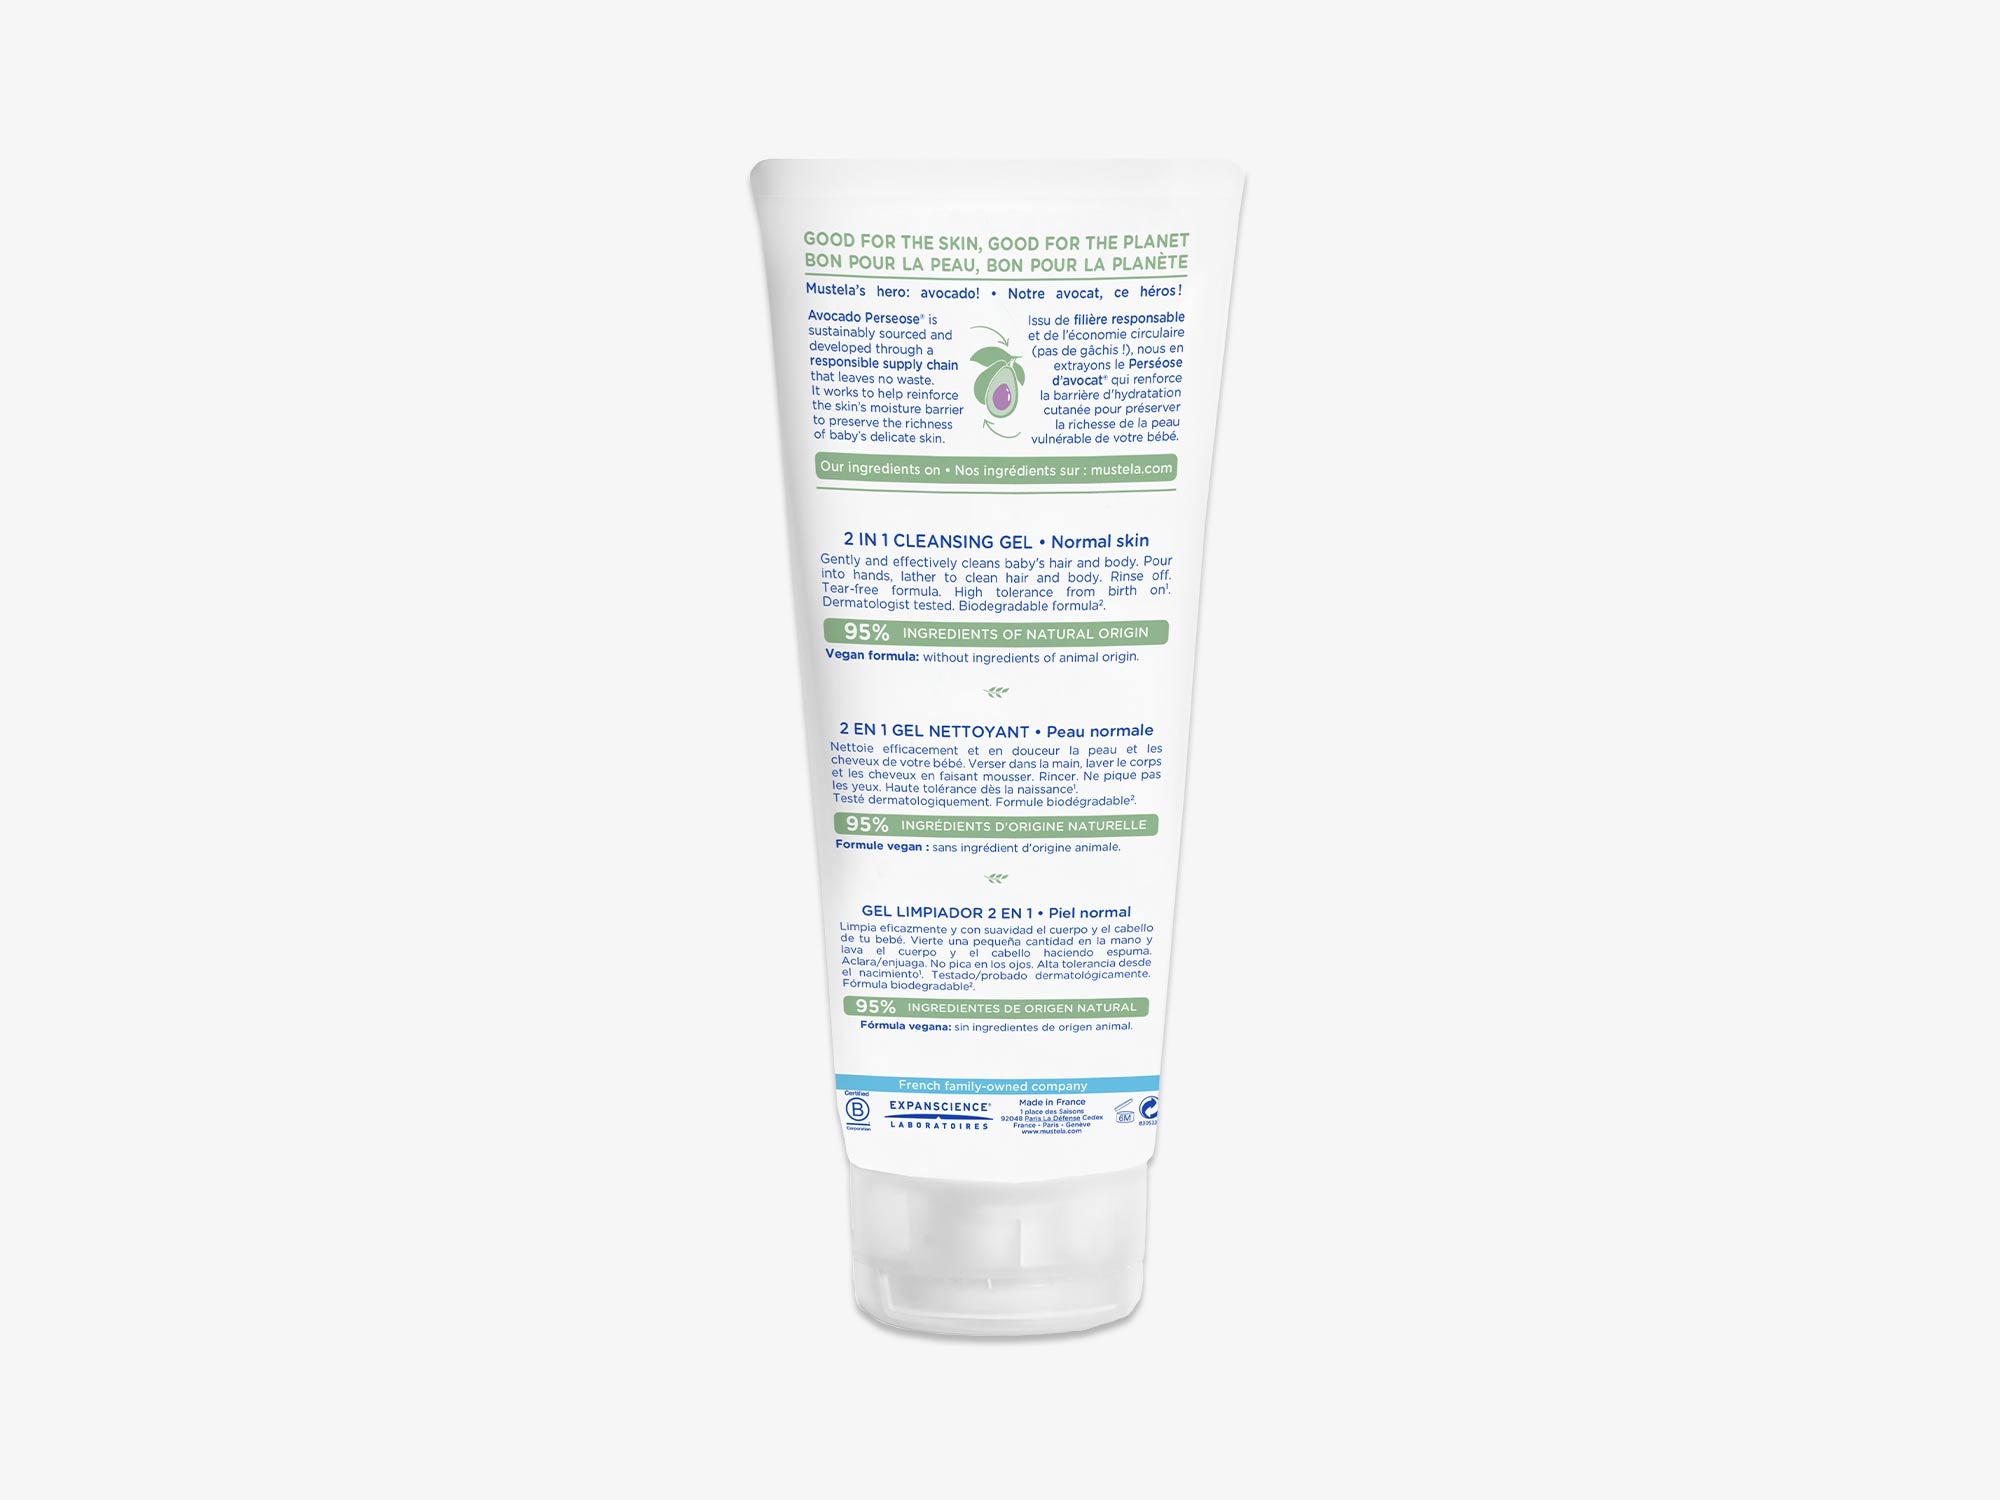  Mustela Baby 2-in-1 Cleansing Gel - Baby Body & Hair Cleanser -  with Natural Avocado - Biodegradable Formula & Tear-Free - 6.76 fl. oz.  (Pack of 1) : Baby